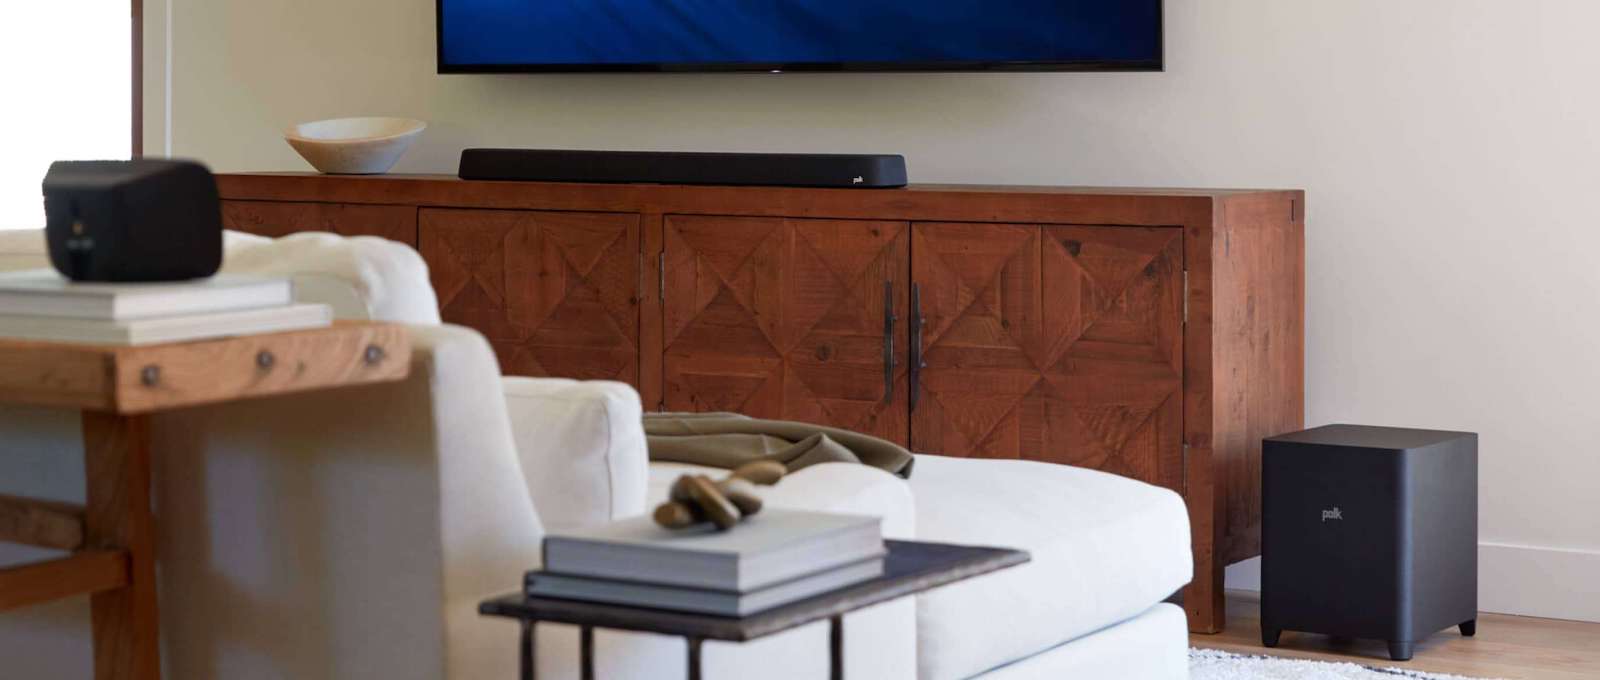 photo of Polk Audio Introduces New MagniFi Max AX Sound Bar Systems With Dolby Atmos, DTS:X, and AirPlay 2 image